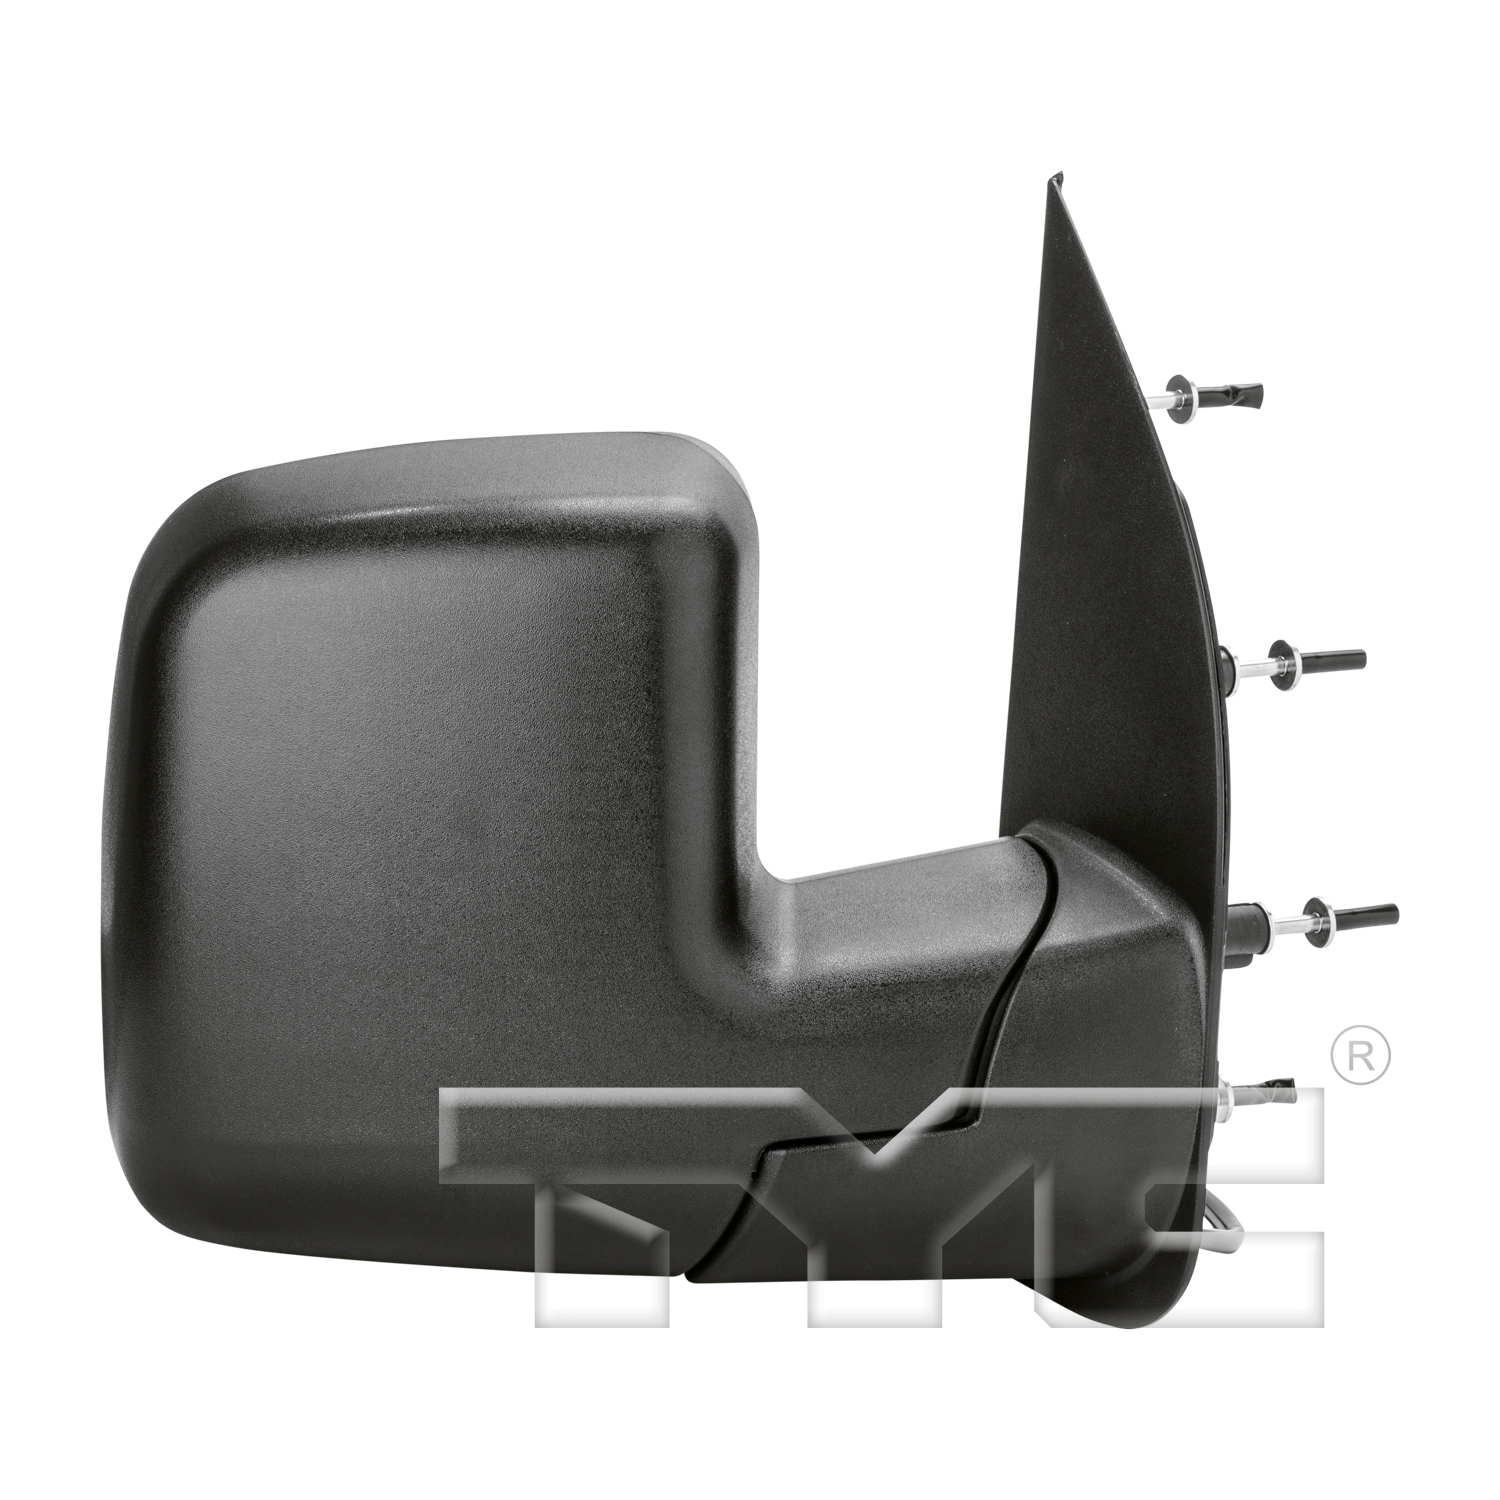 Aftermarket MIRRORS for FORD - E-350 SUPER DUTY, E-350 SUPER DUTY,03-06,RT Mirror outside rear view